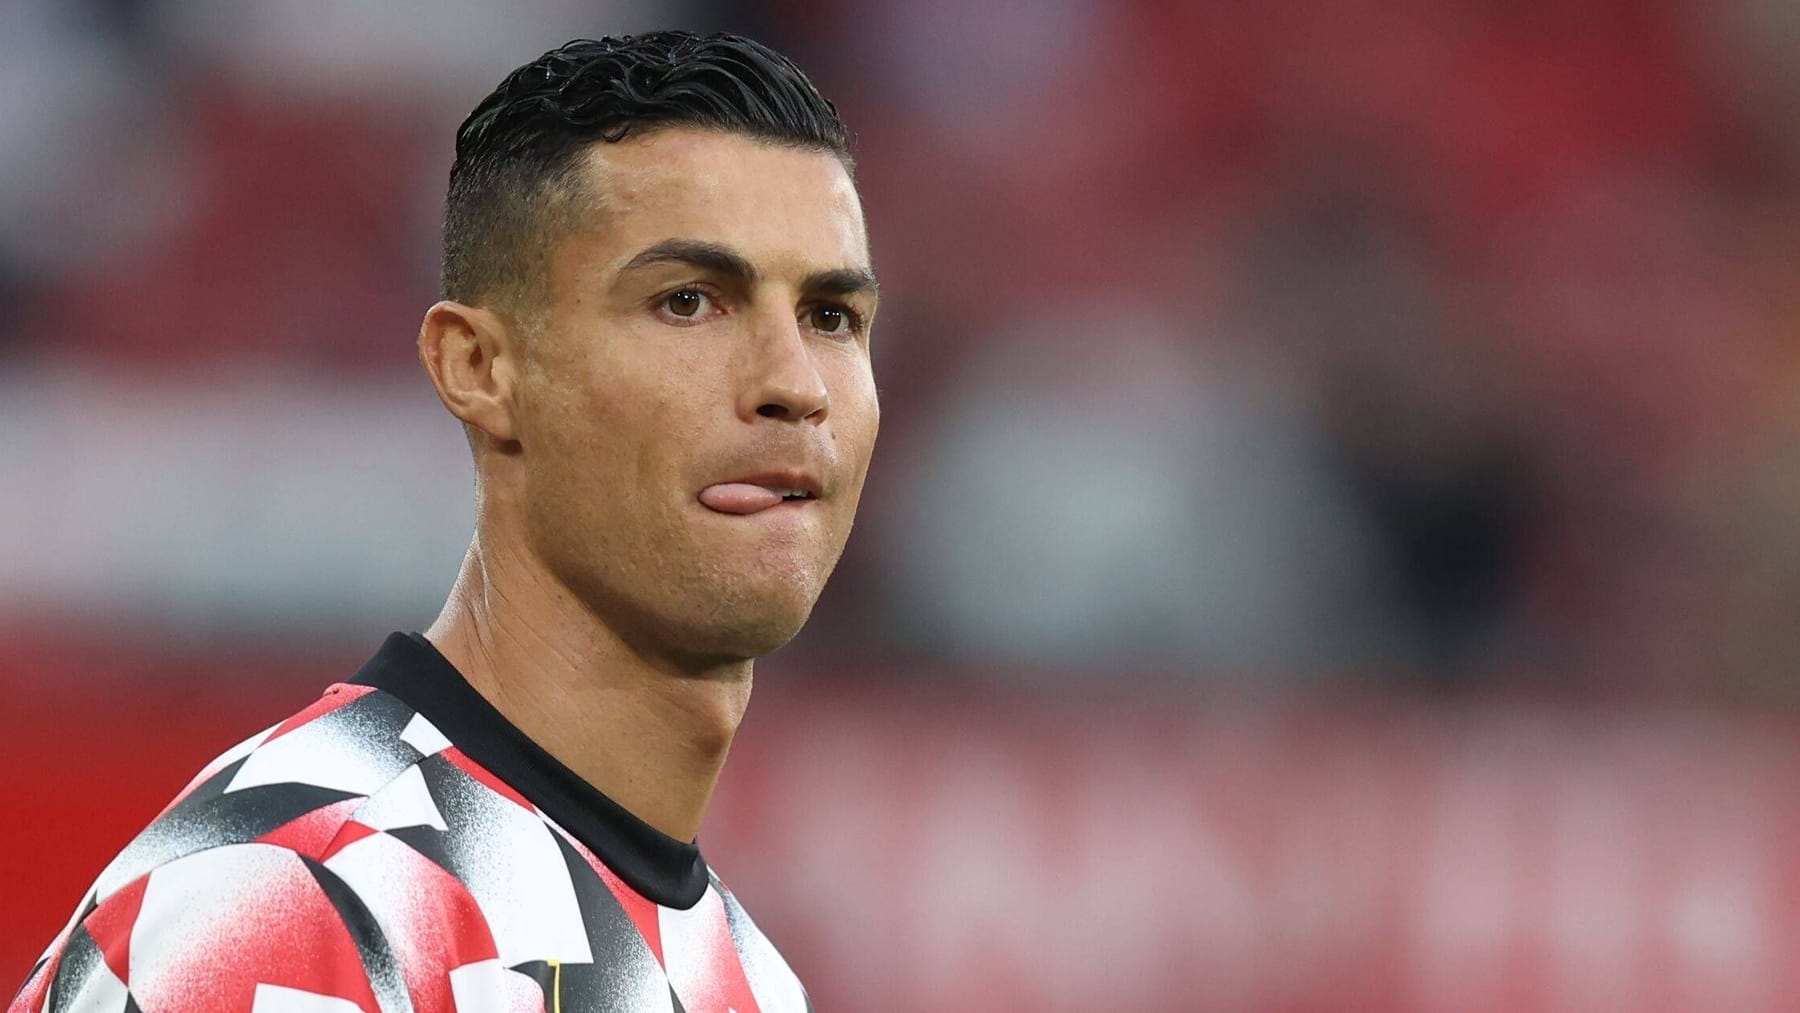 Cristiano Ronaldo almost ended up in the United States